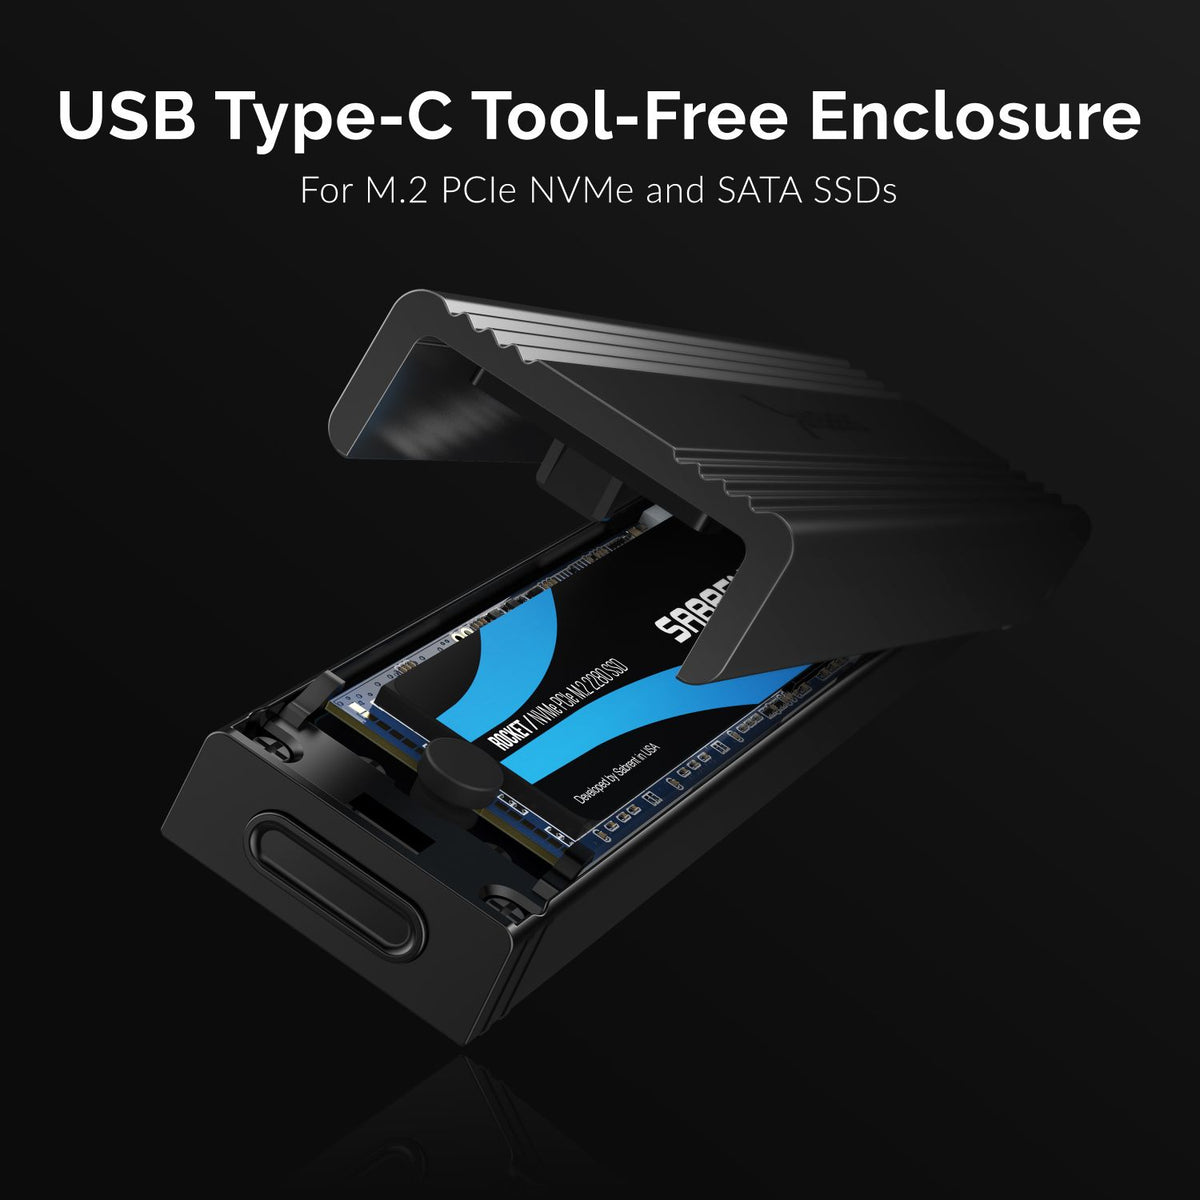 USB 3.2 Type-C Tool-Free Enclosure for M.2 PCIe NVMe and SATA SSDs